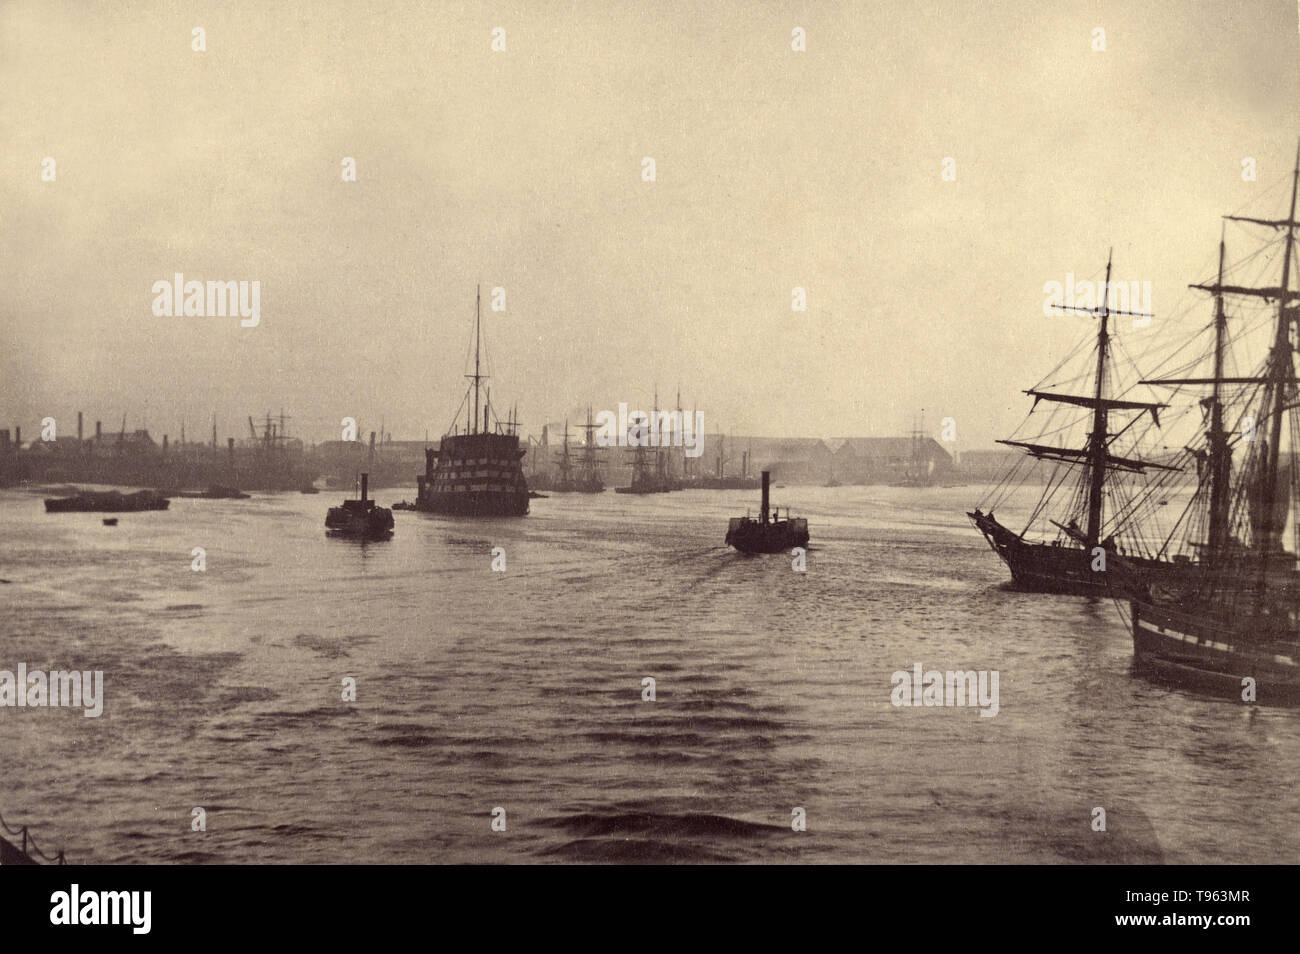 View of ships on the Thames at Greenwich, c. 1870. Photographed by Ludwig Schultz (British, active Greenwich, England 1860s). Stock Photo